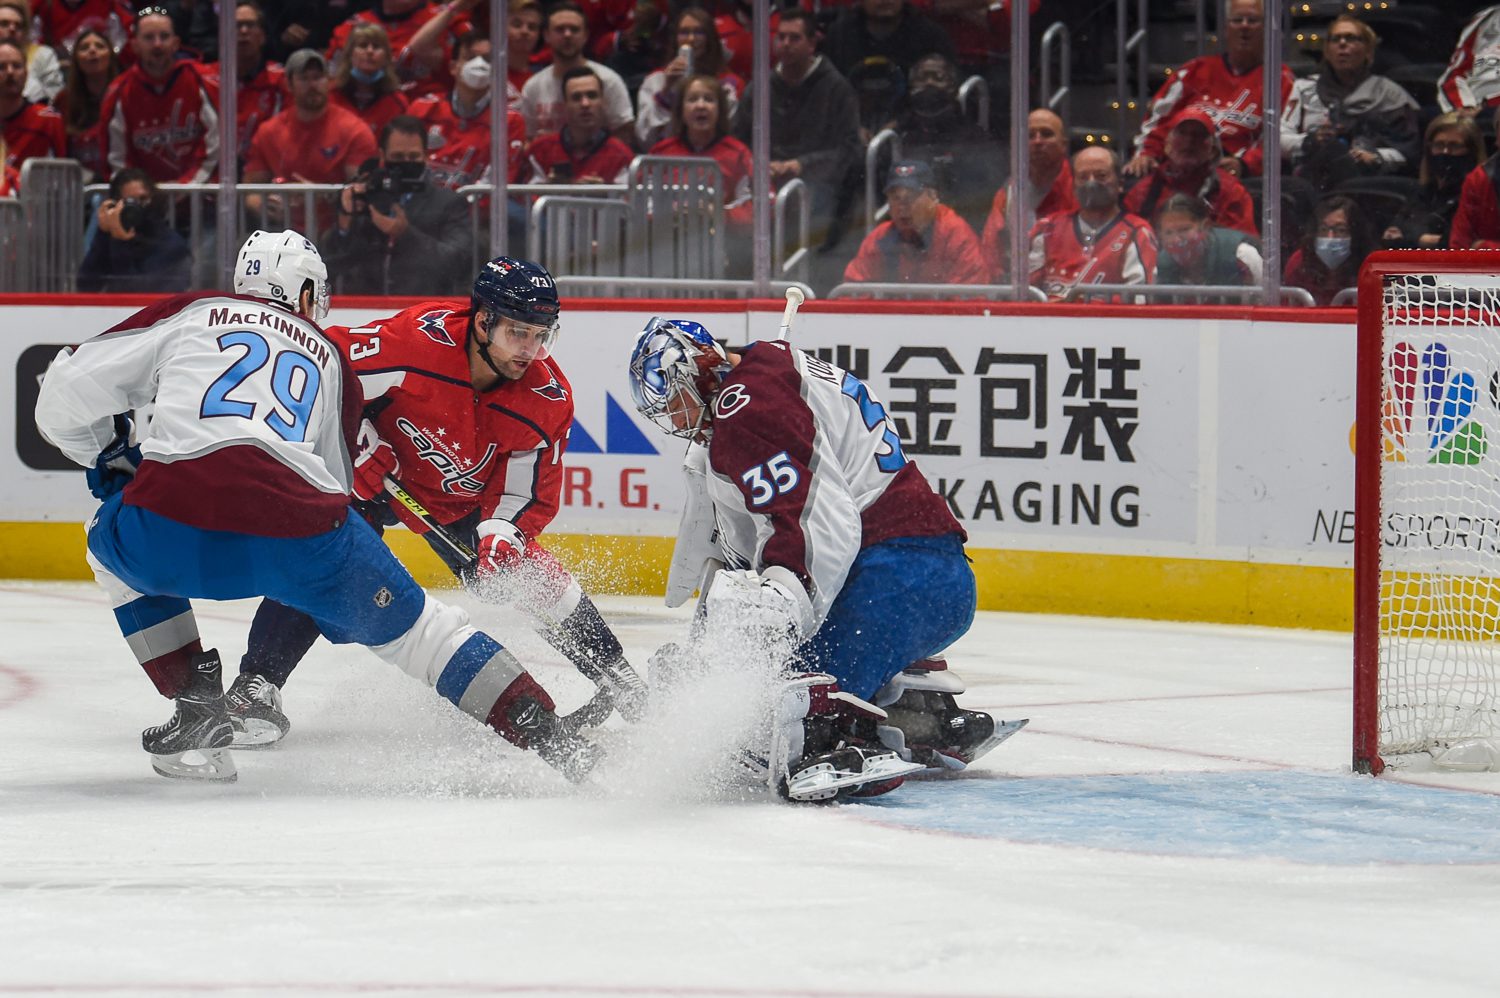 Nathan MacKinnon battles Connor Sheary for the puck in front of Philipp Grubauer's net (Image: All-Pro Reels)